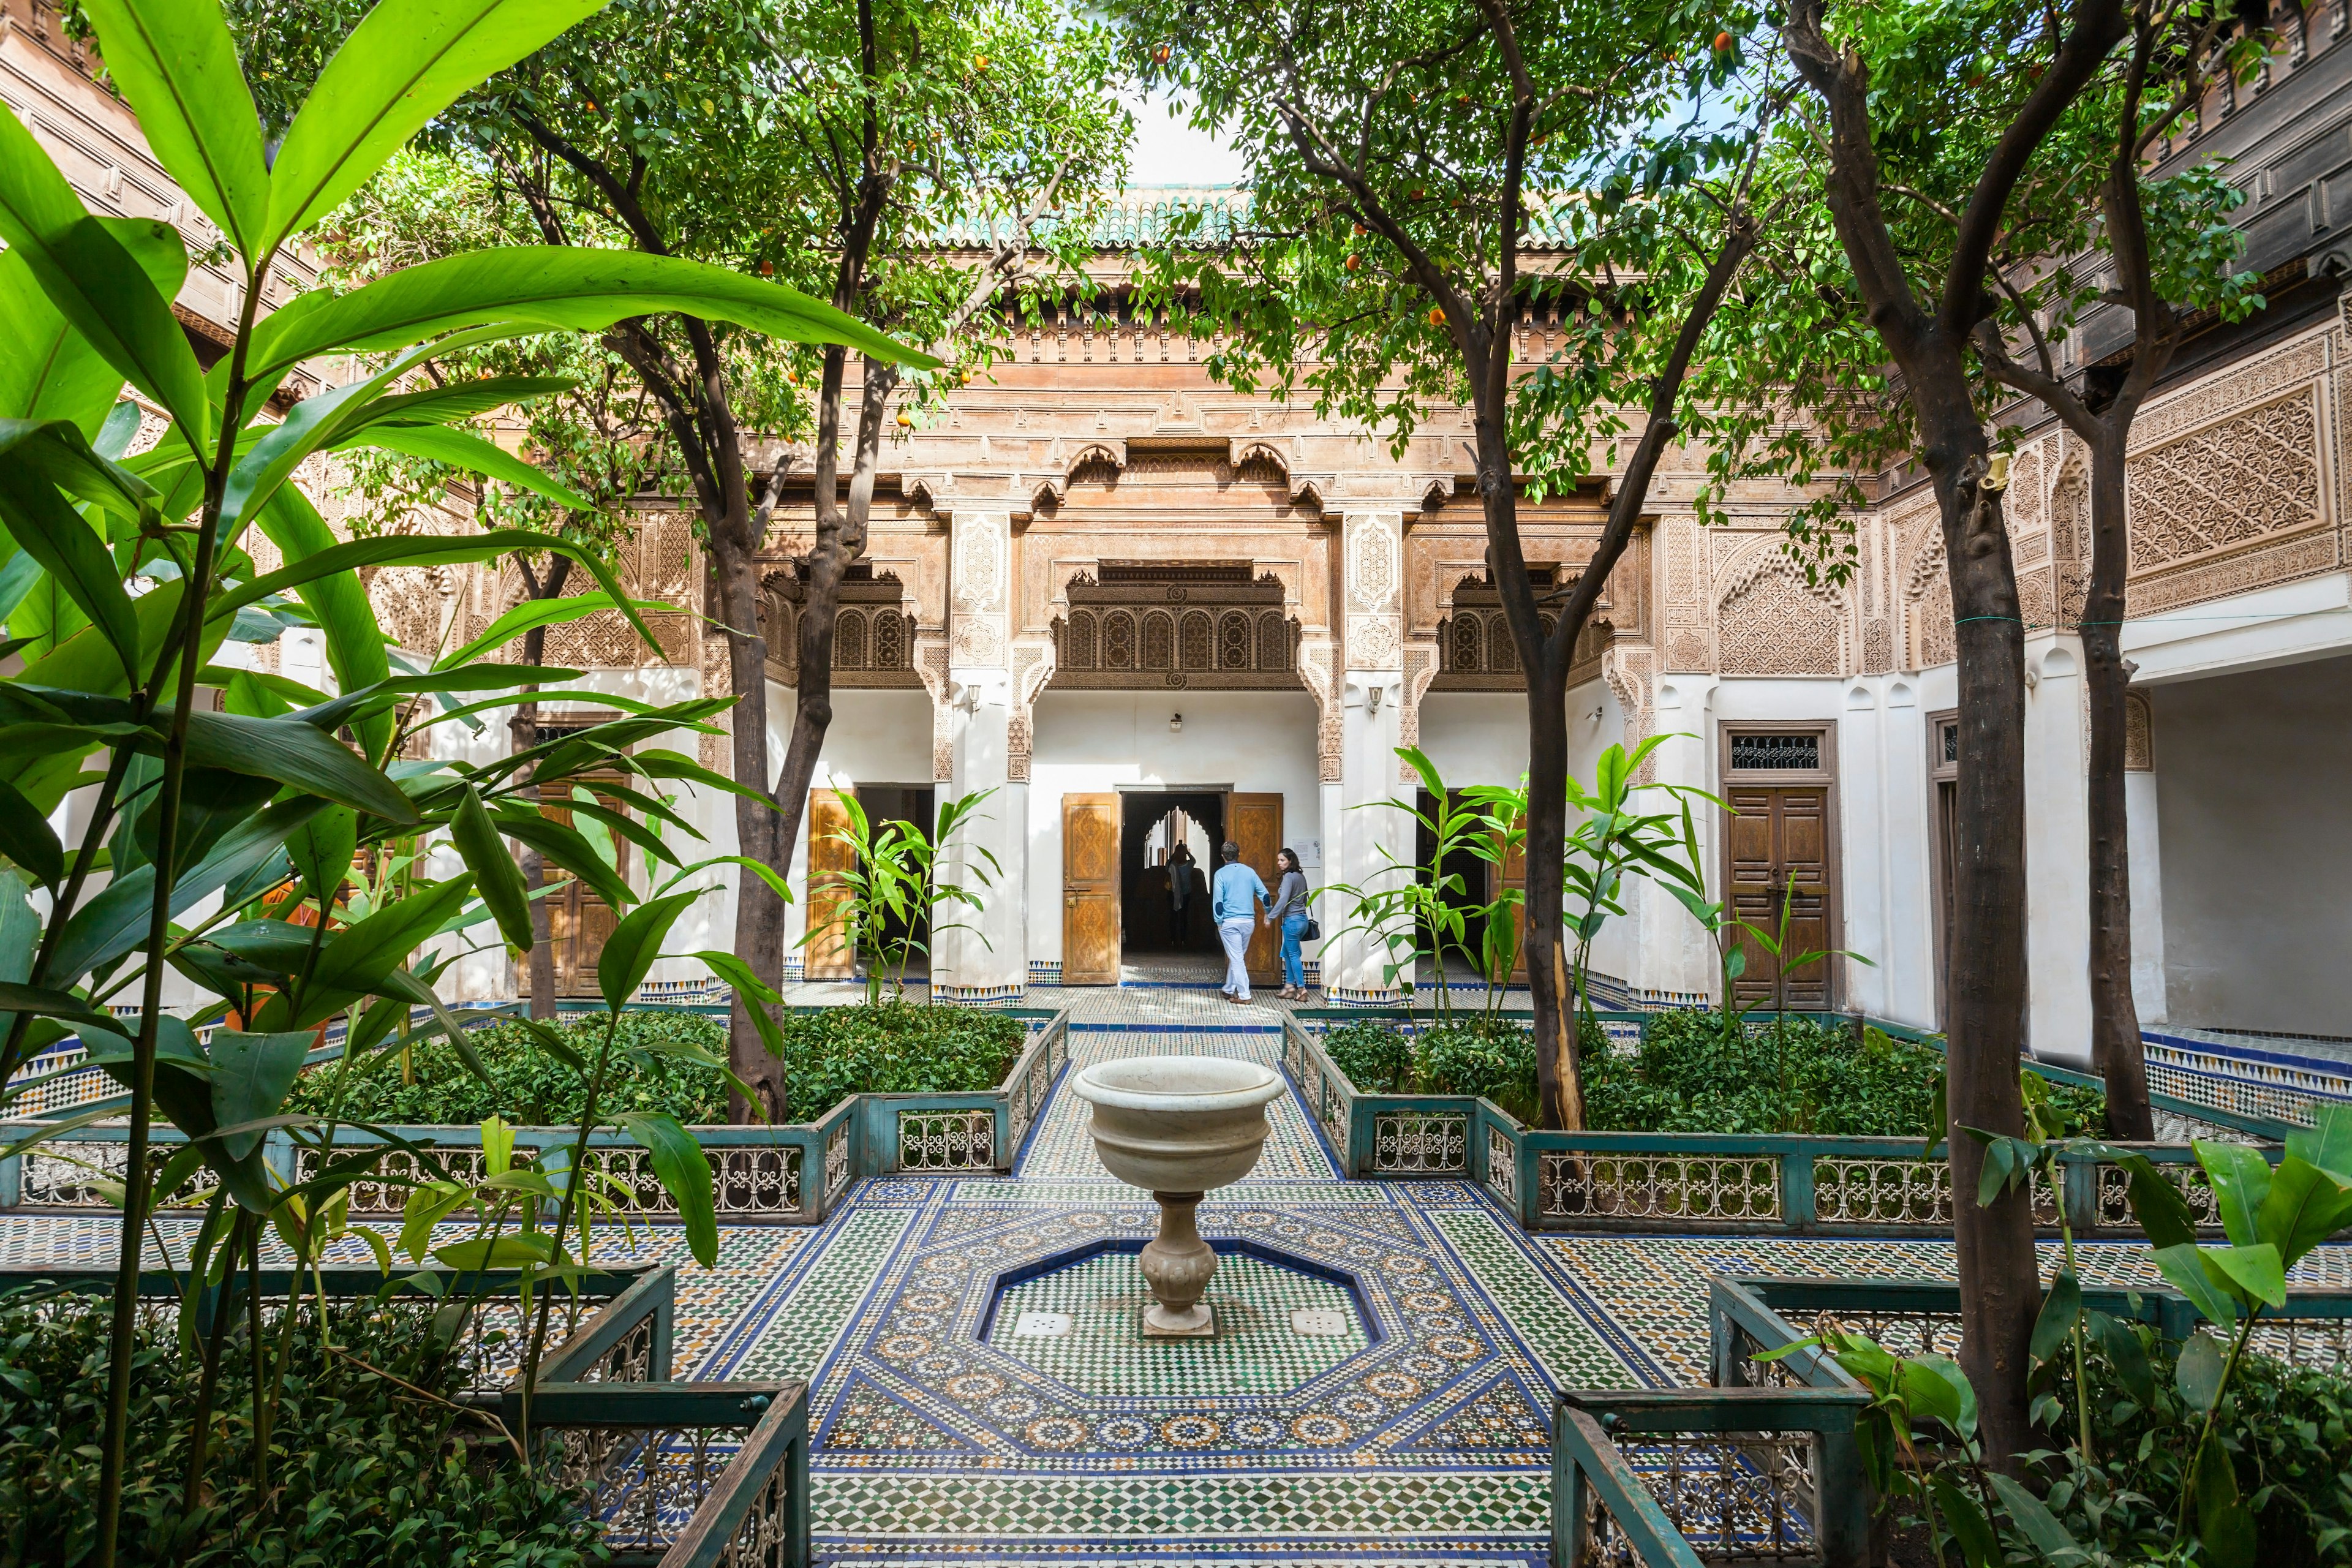 MARRAKECH, MOROCCO - FEBRUARY 22, 2016: The Marrakesh Bahia Palace is a palace and a set of gardens located in Marrakesh, Morocco.